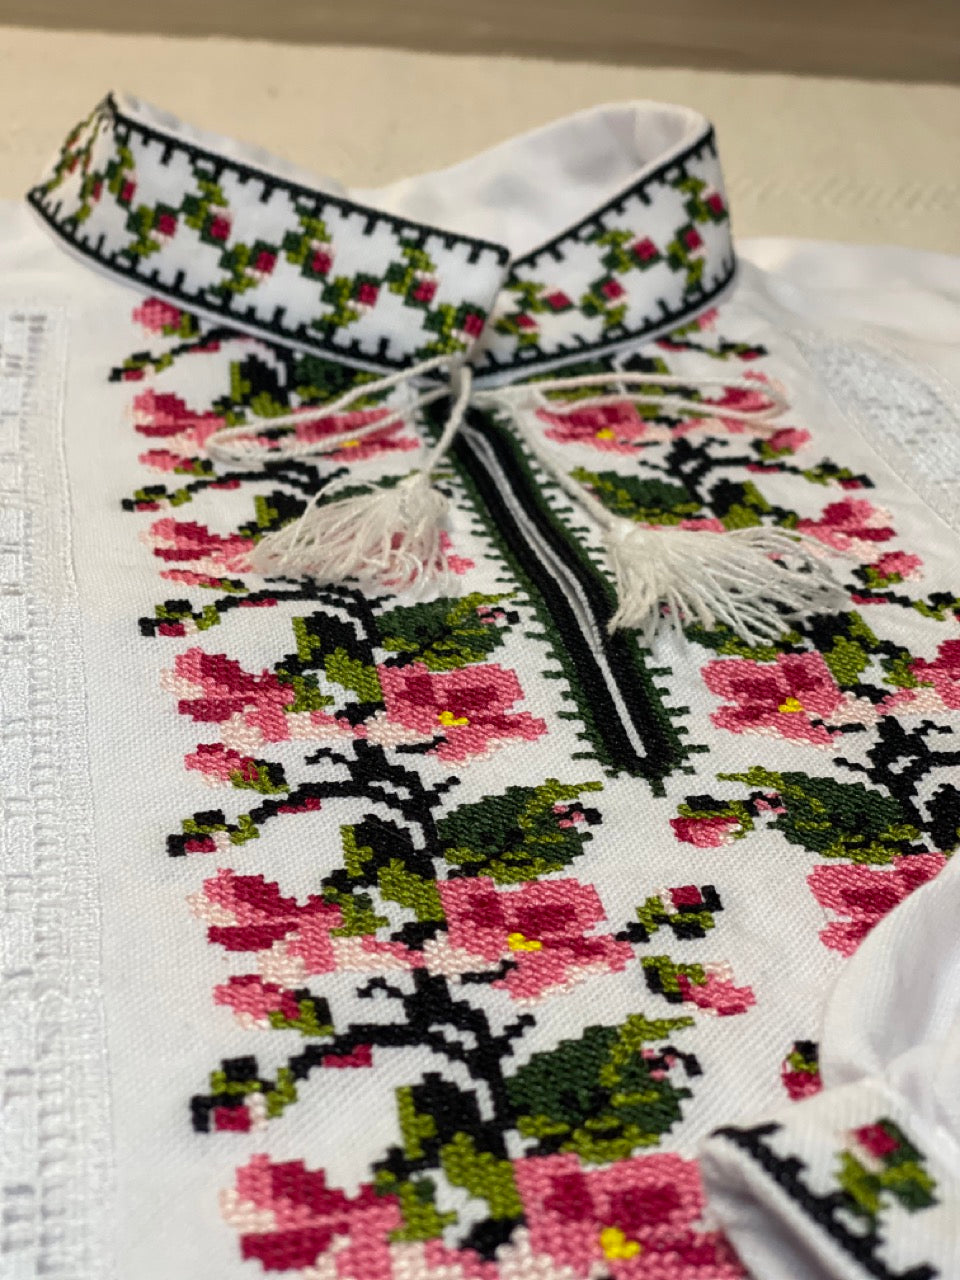 White Men's Vyshyvanka Shirt with Pink Embroidery